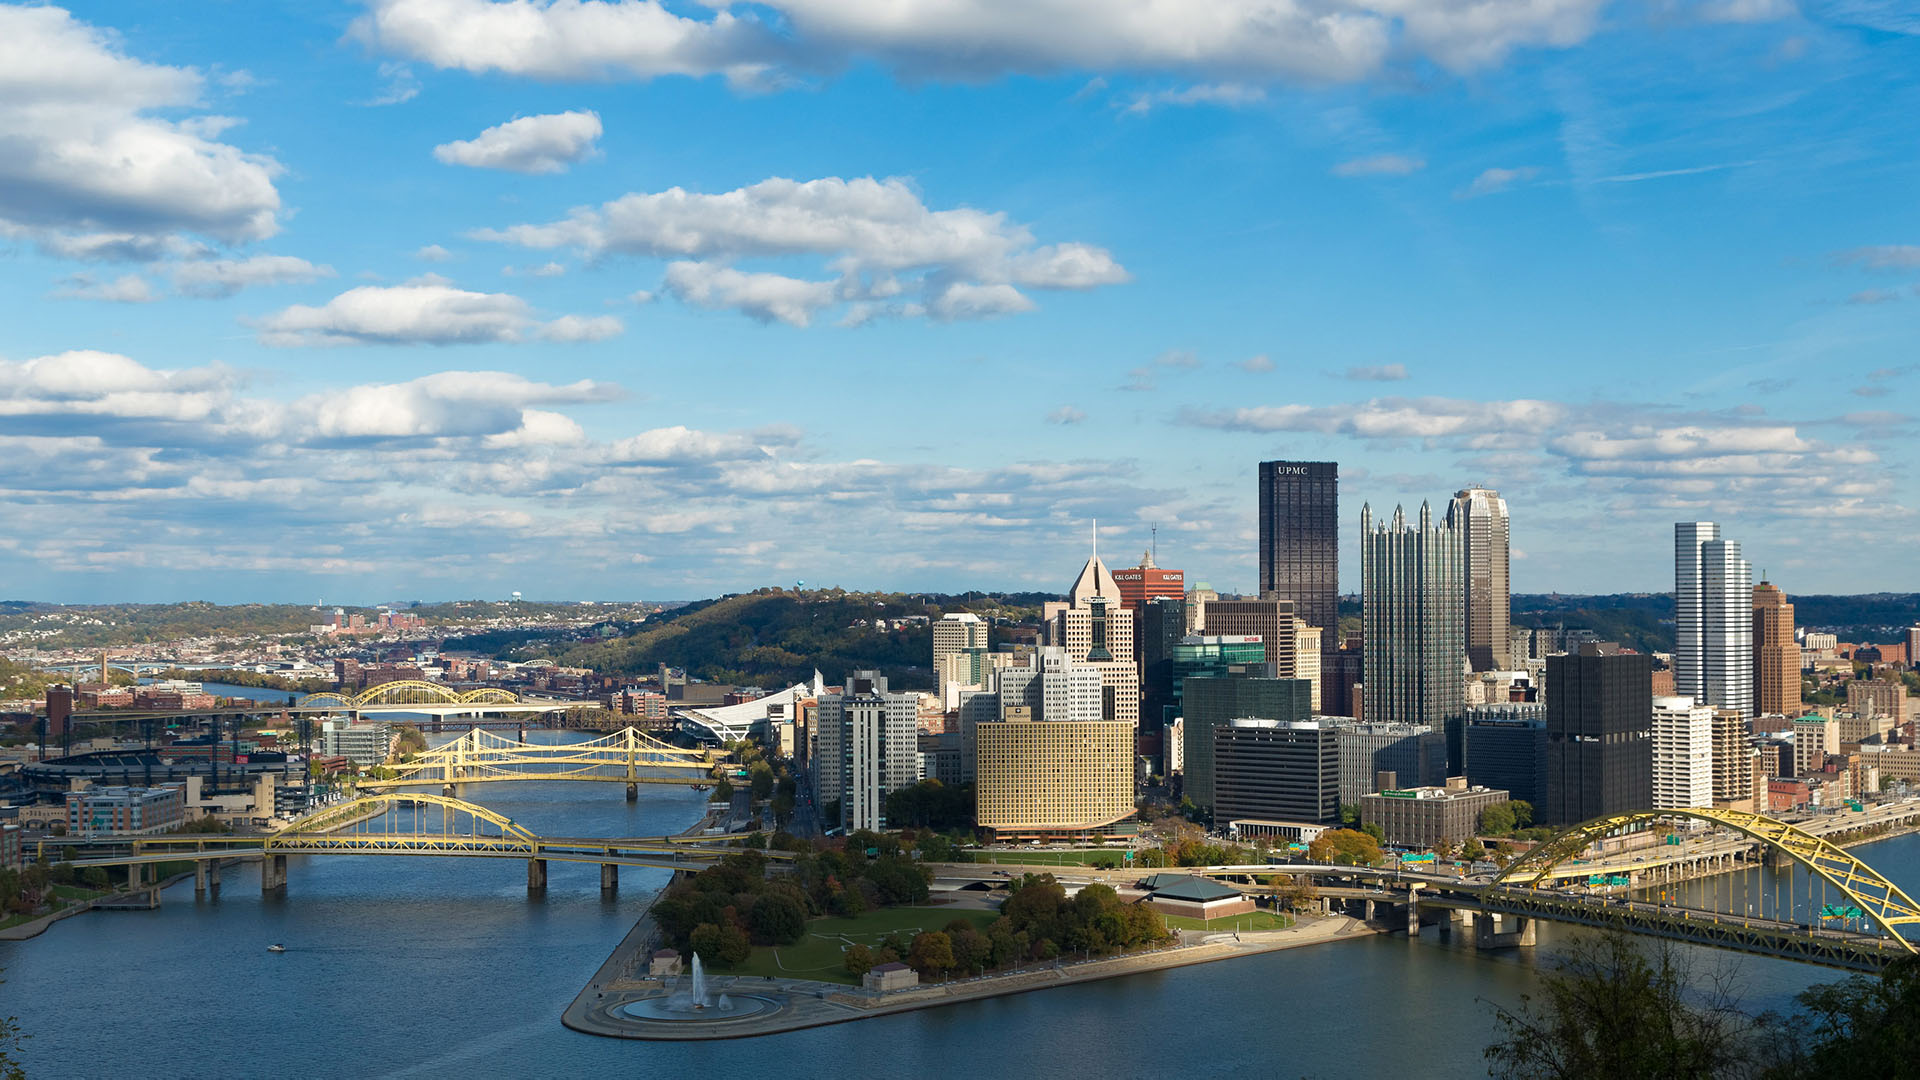 1K Pittsburgh Pictures  Download Free Images on Unsplash